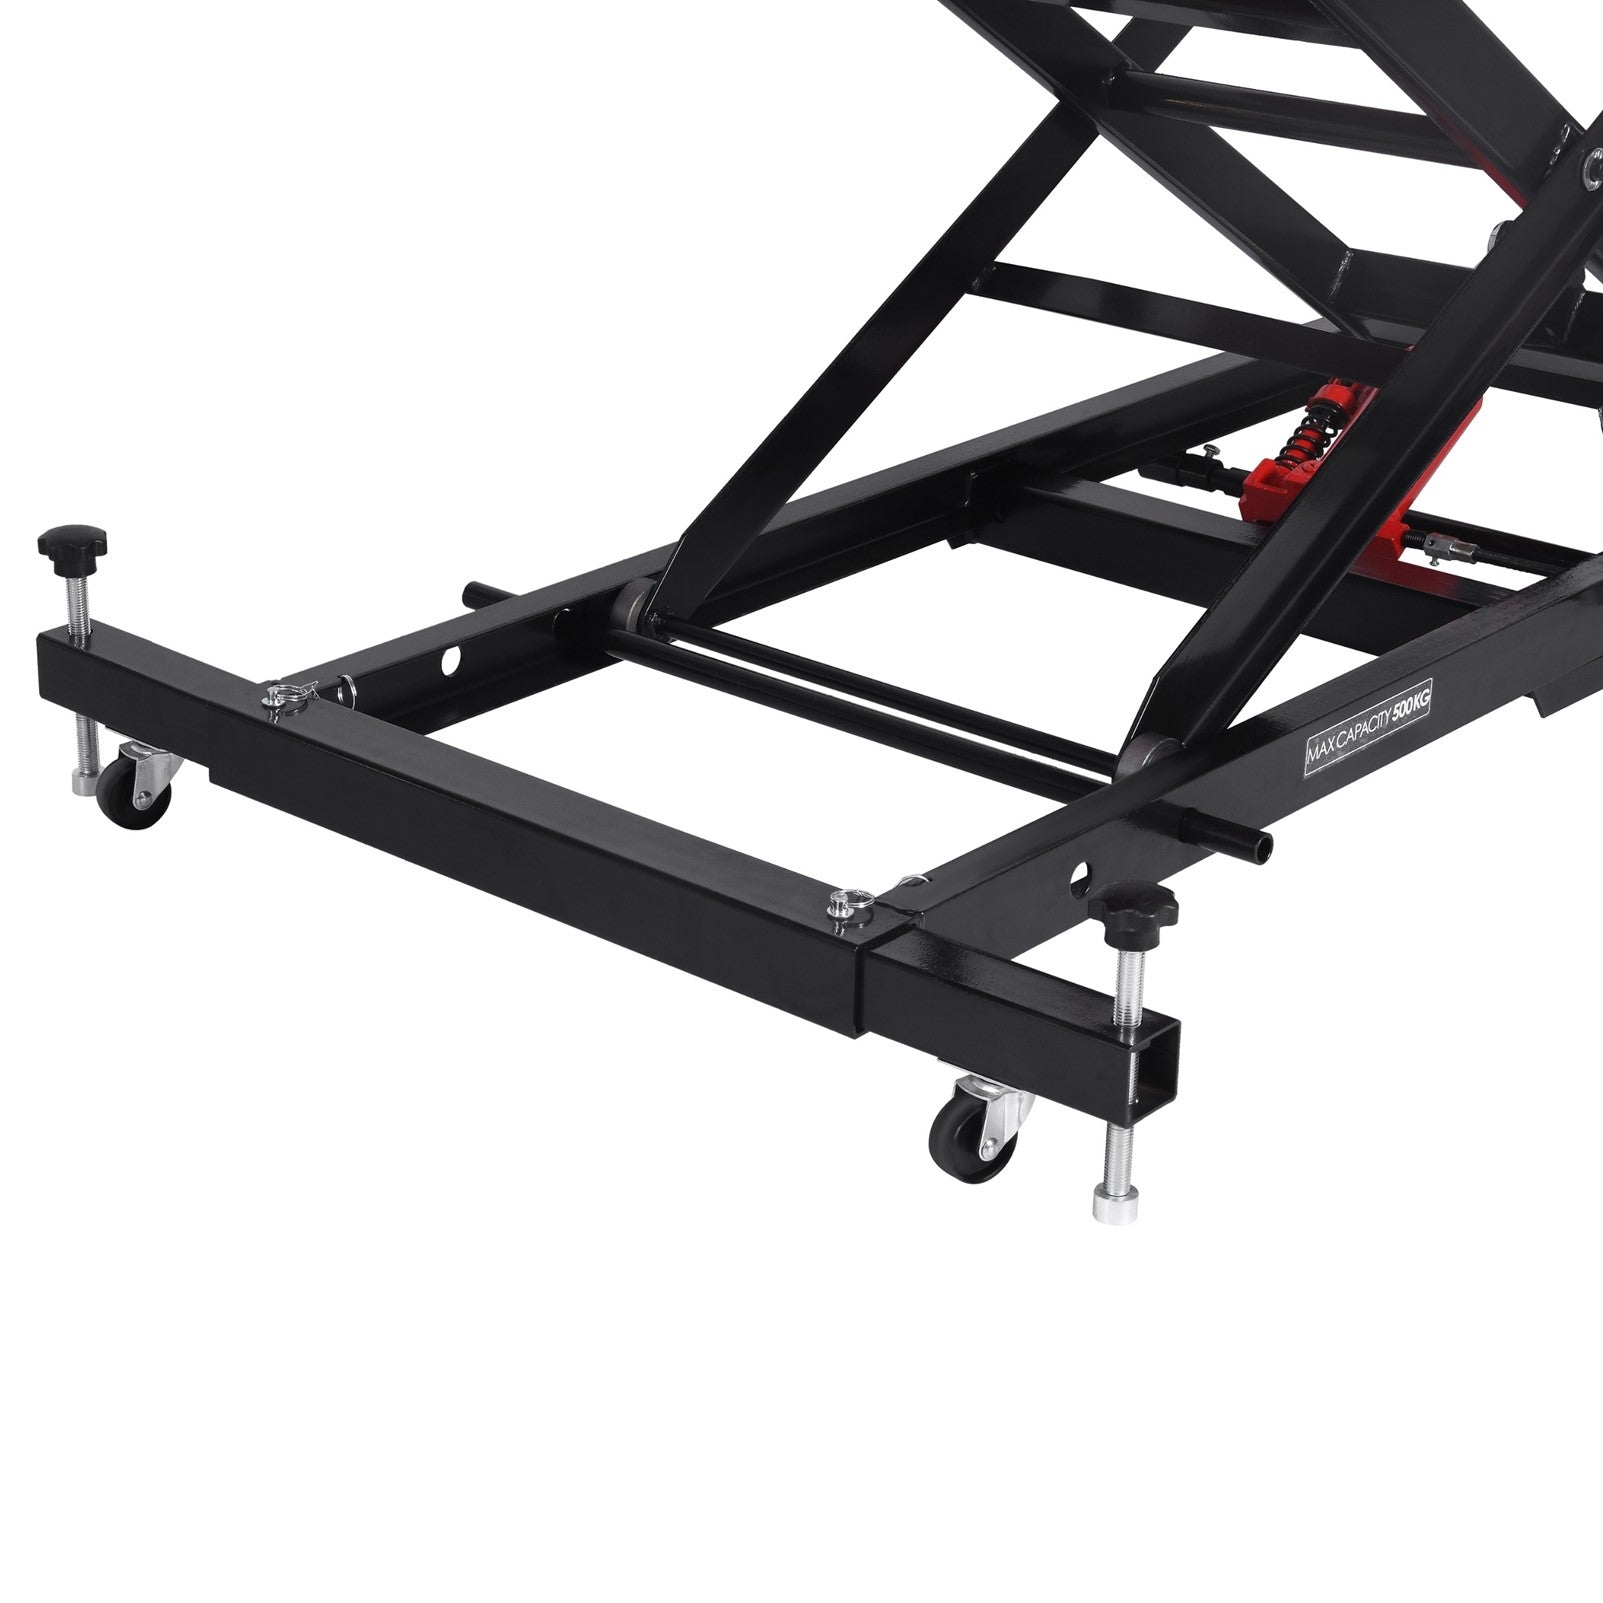 Motorcycle Lift Table - Hydraulic Jack